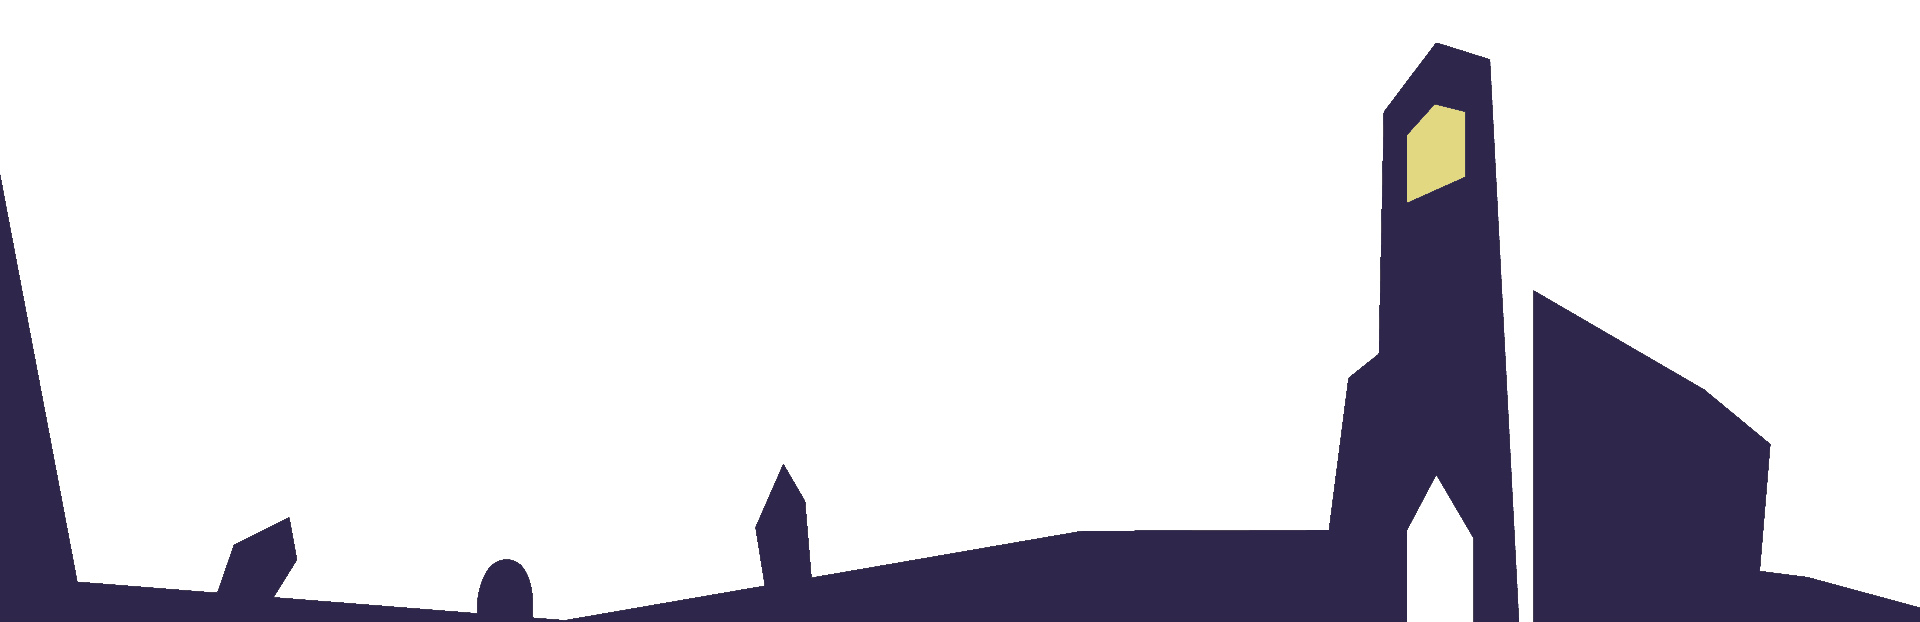 Ghostly bounce